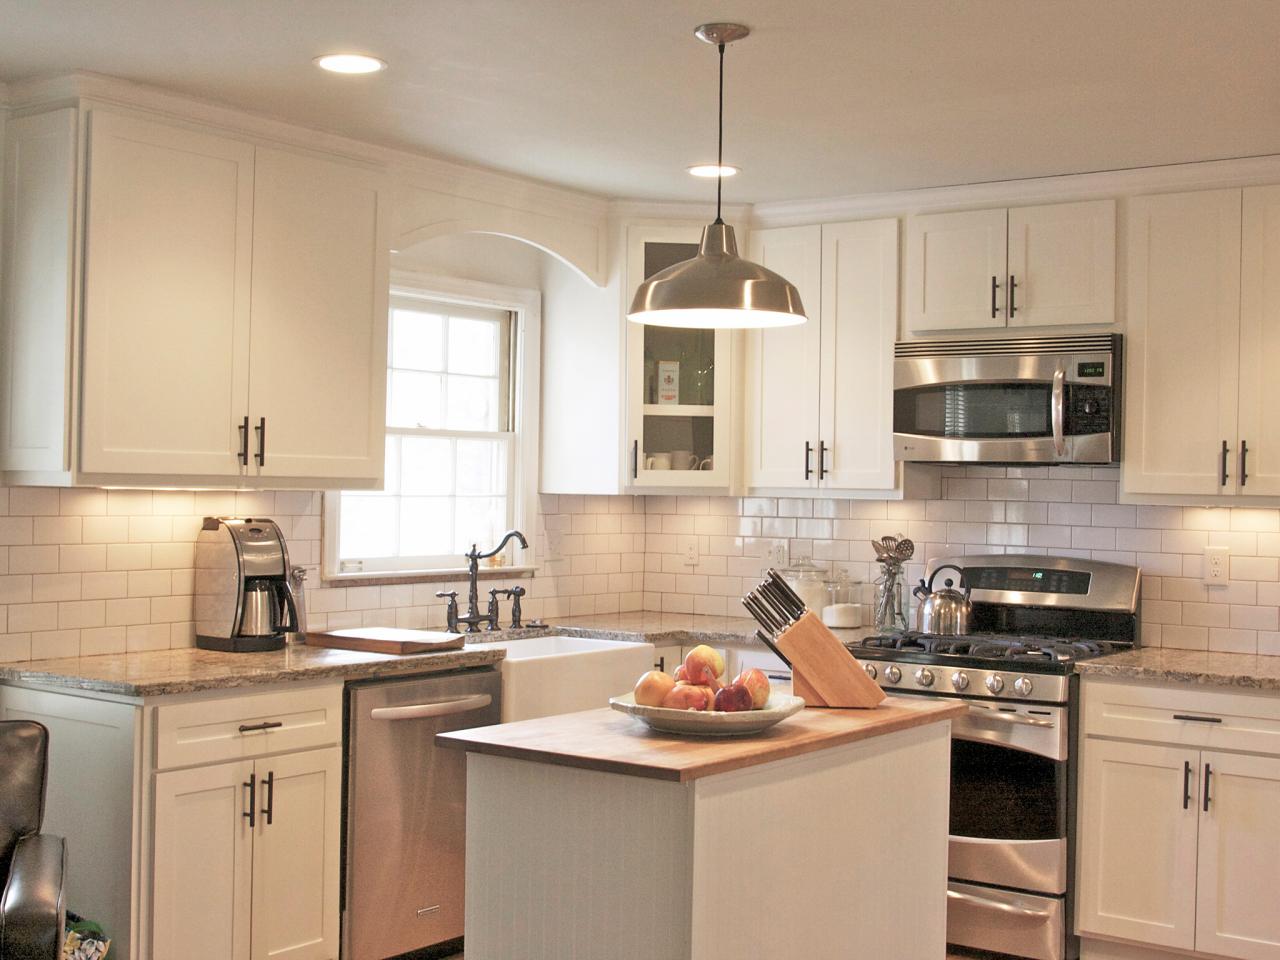 Shaker Kitchen Cabinets Pictures, Options, Tips & Ideas   HGTV